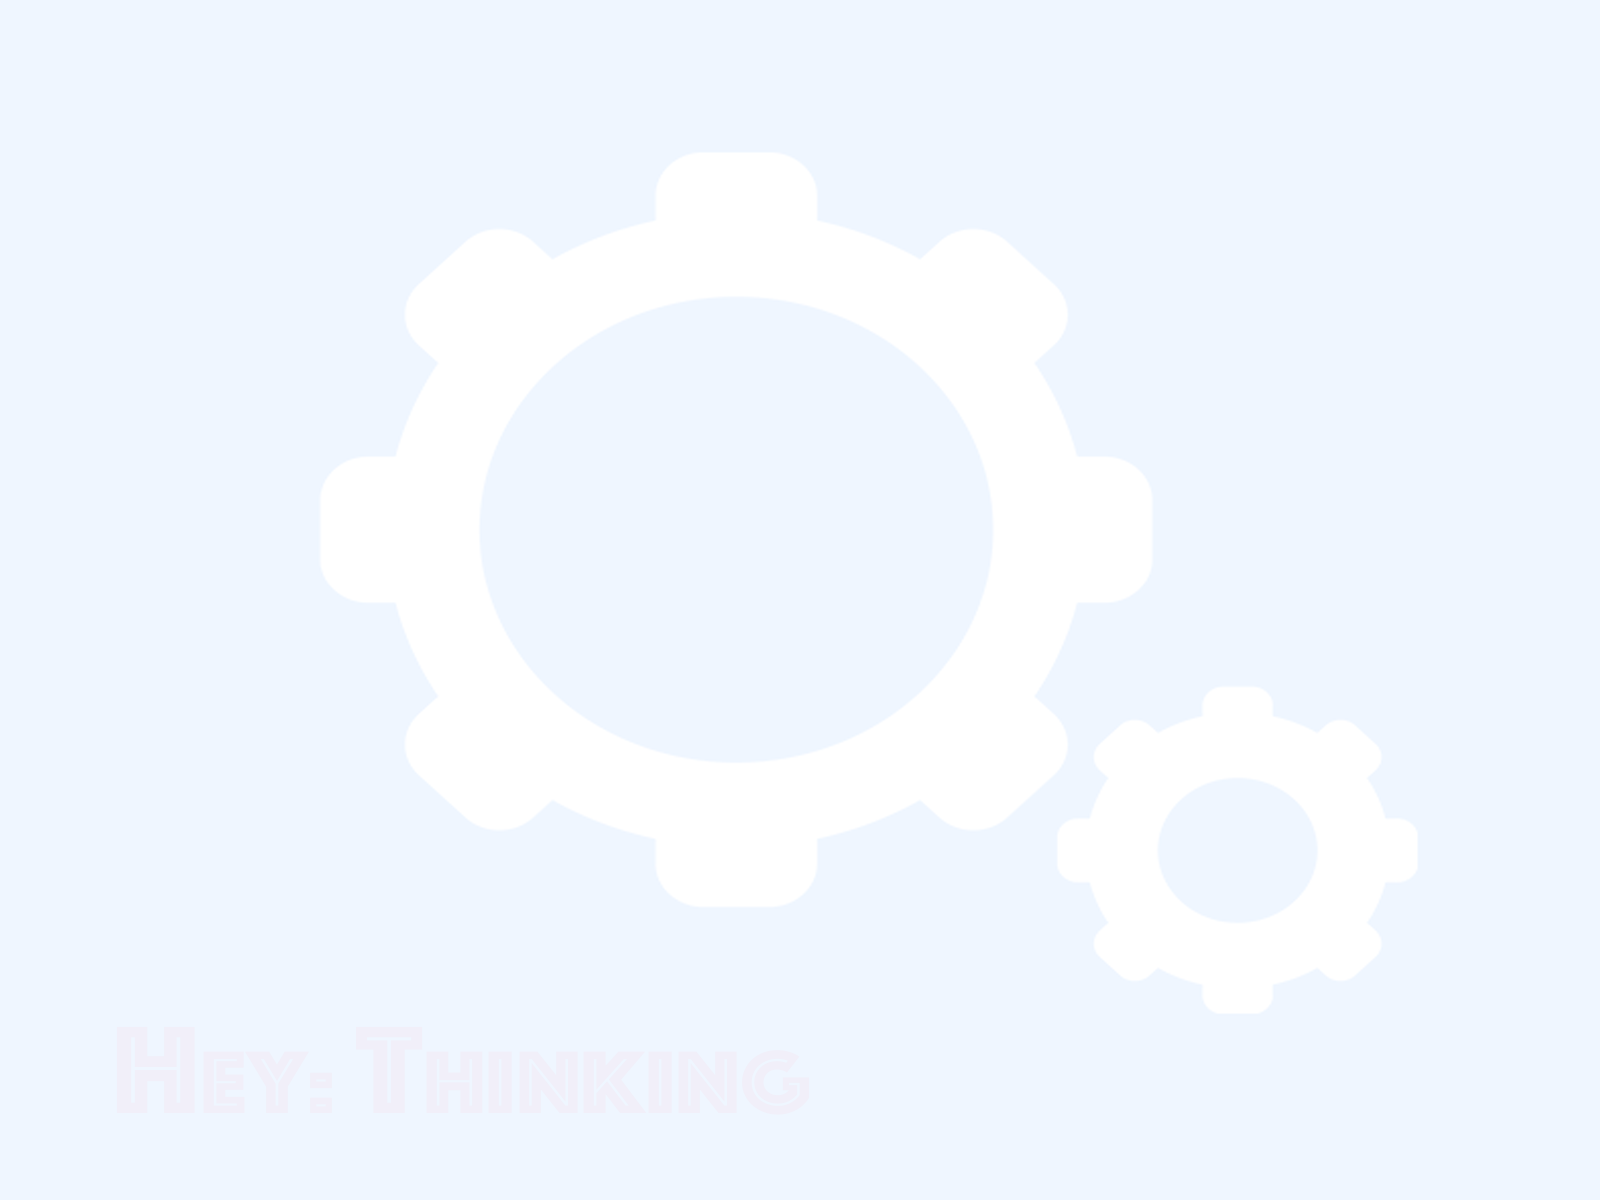 Thinking animated gif loader processing relaxed